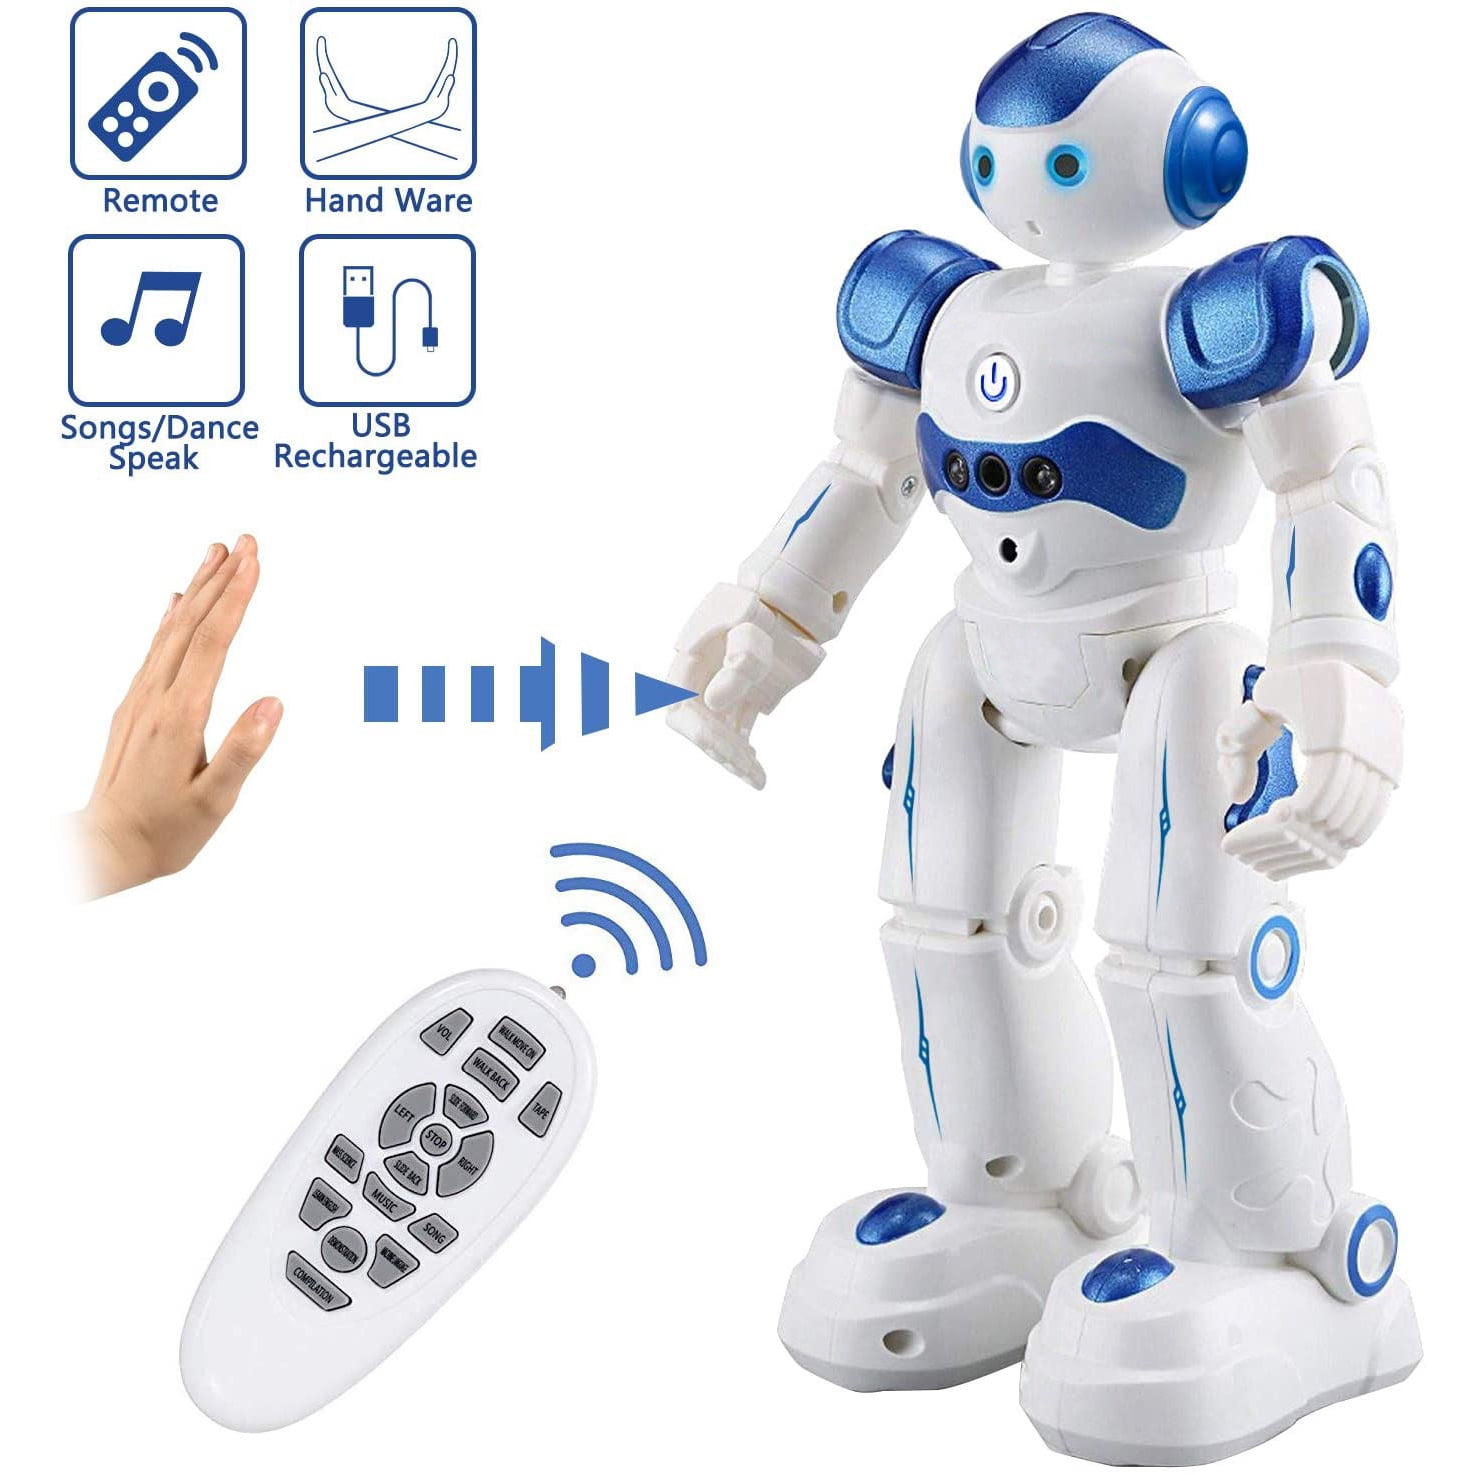 RC Robot Toy for Kids Remote Control Robots with Gesture Sensing Control Dancing 